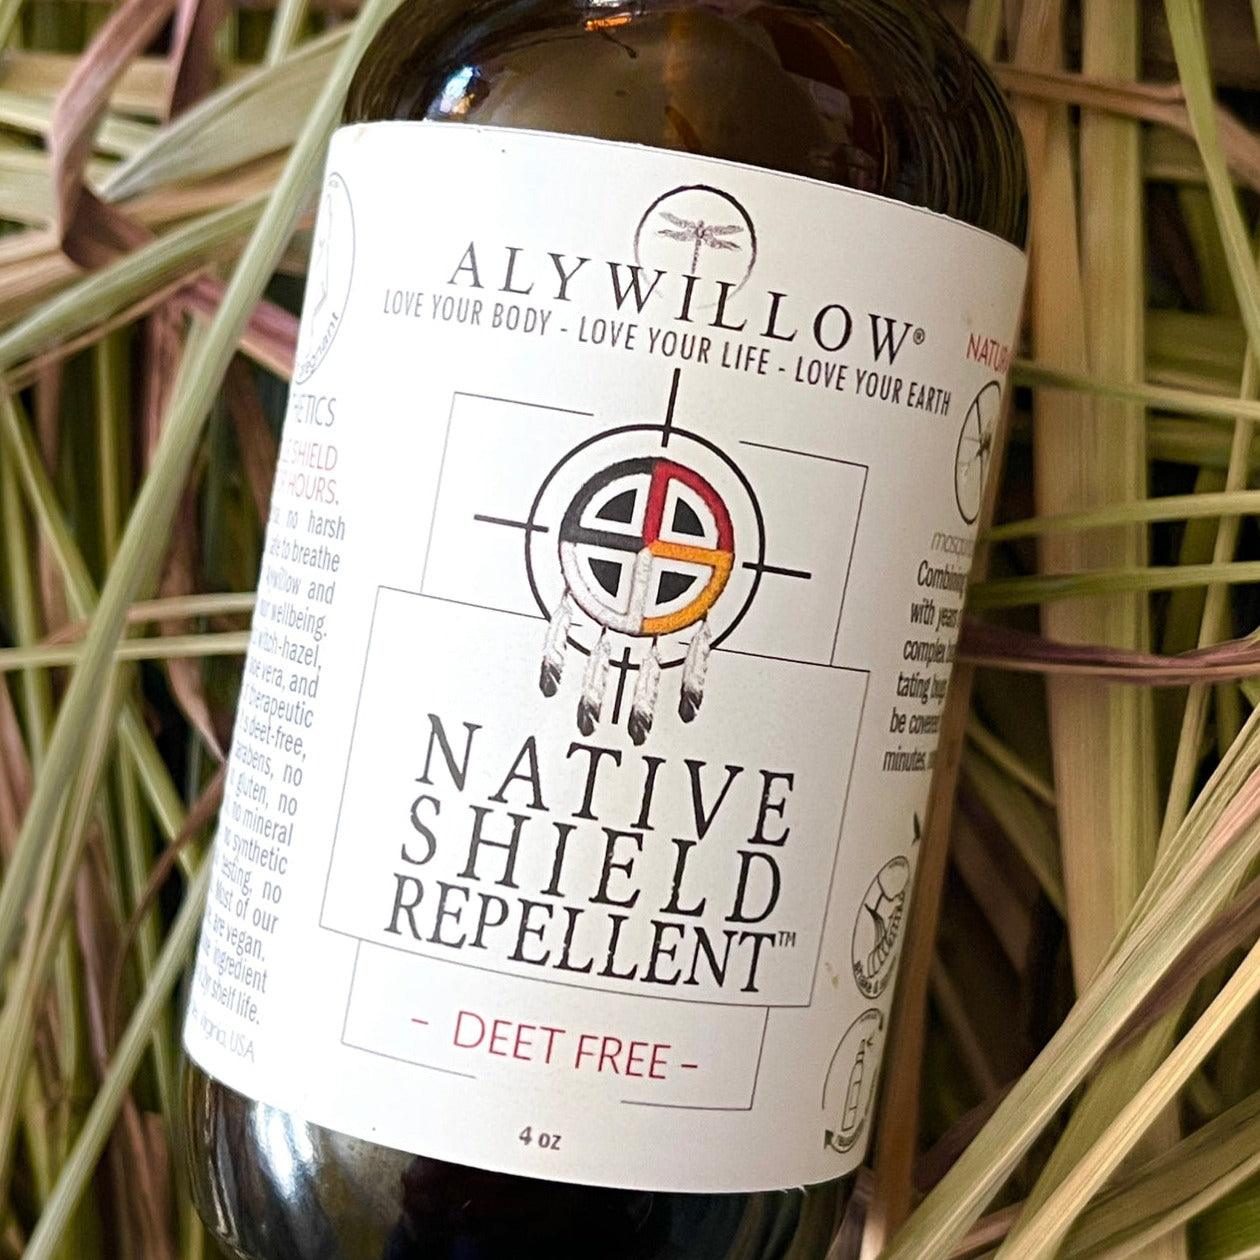 NATIVE-SHIELD Bug Repellent - Alywillow